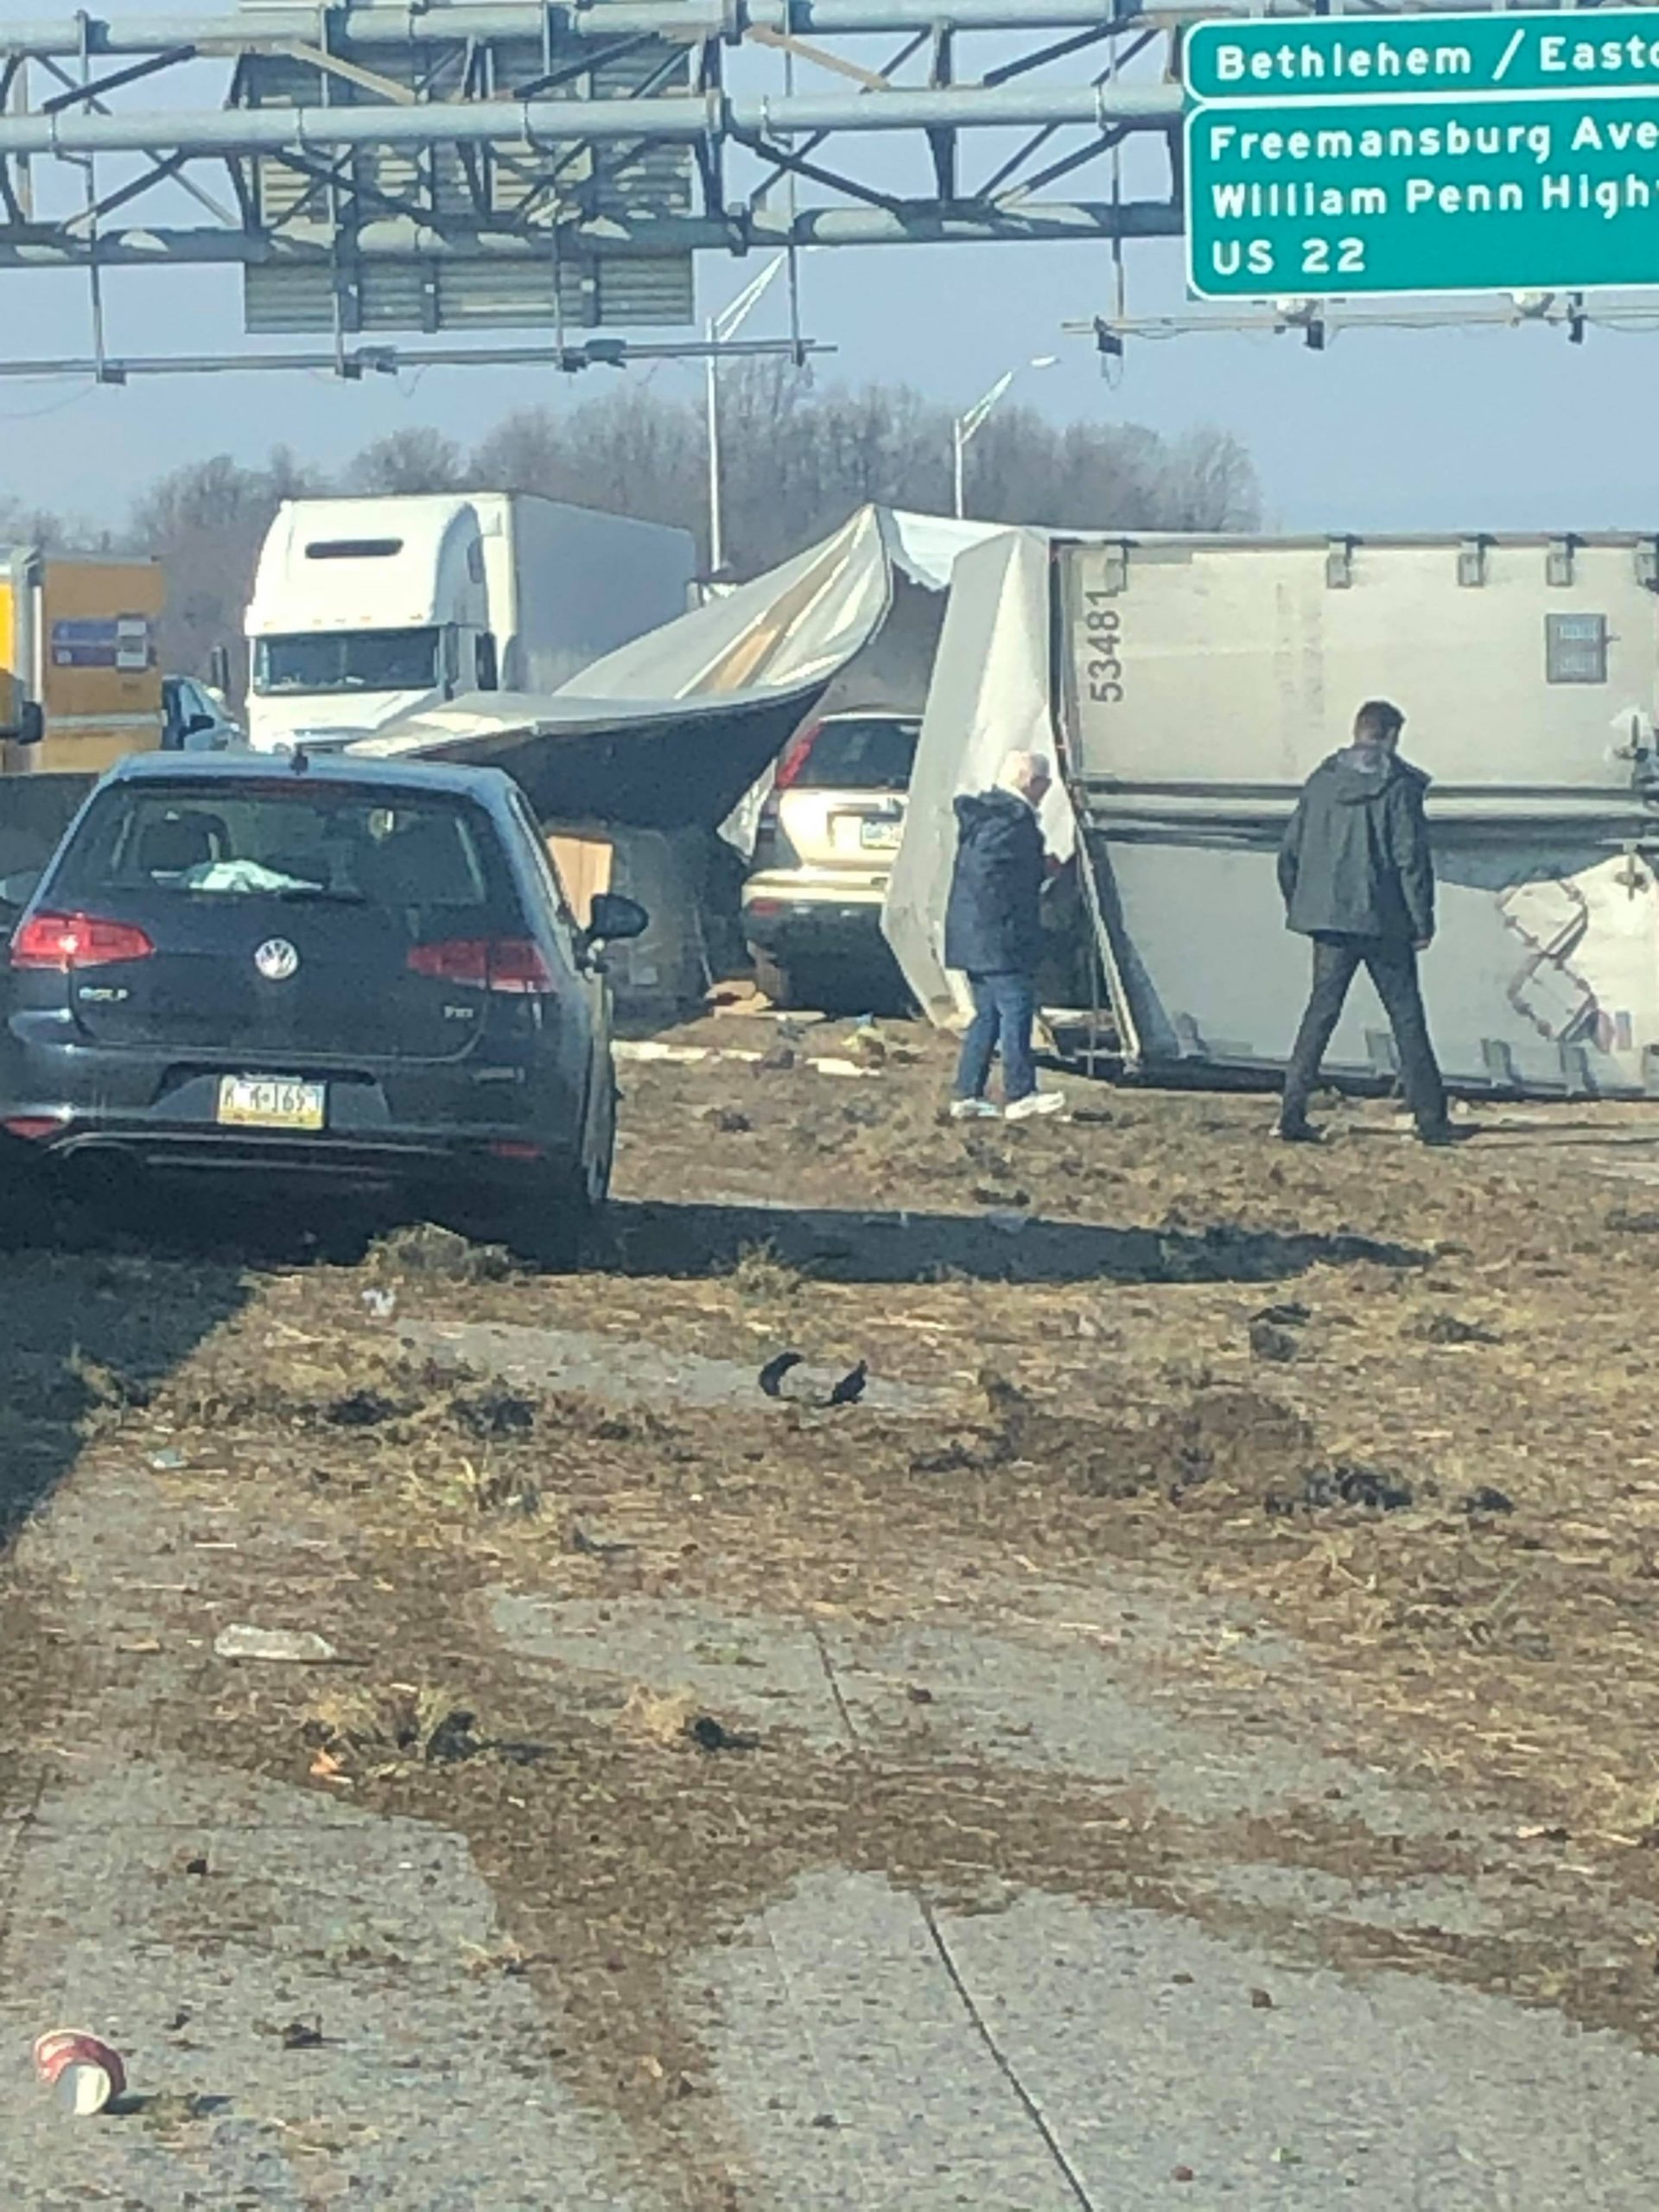 Truck Accident at Rt. 33 North, I78 Ties Up Traffic Saucon Source